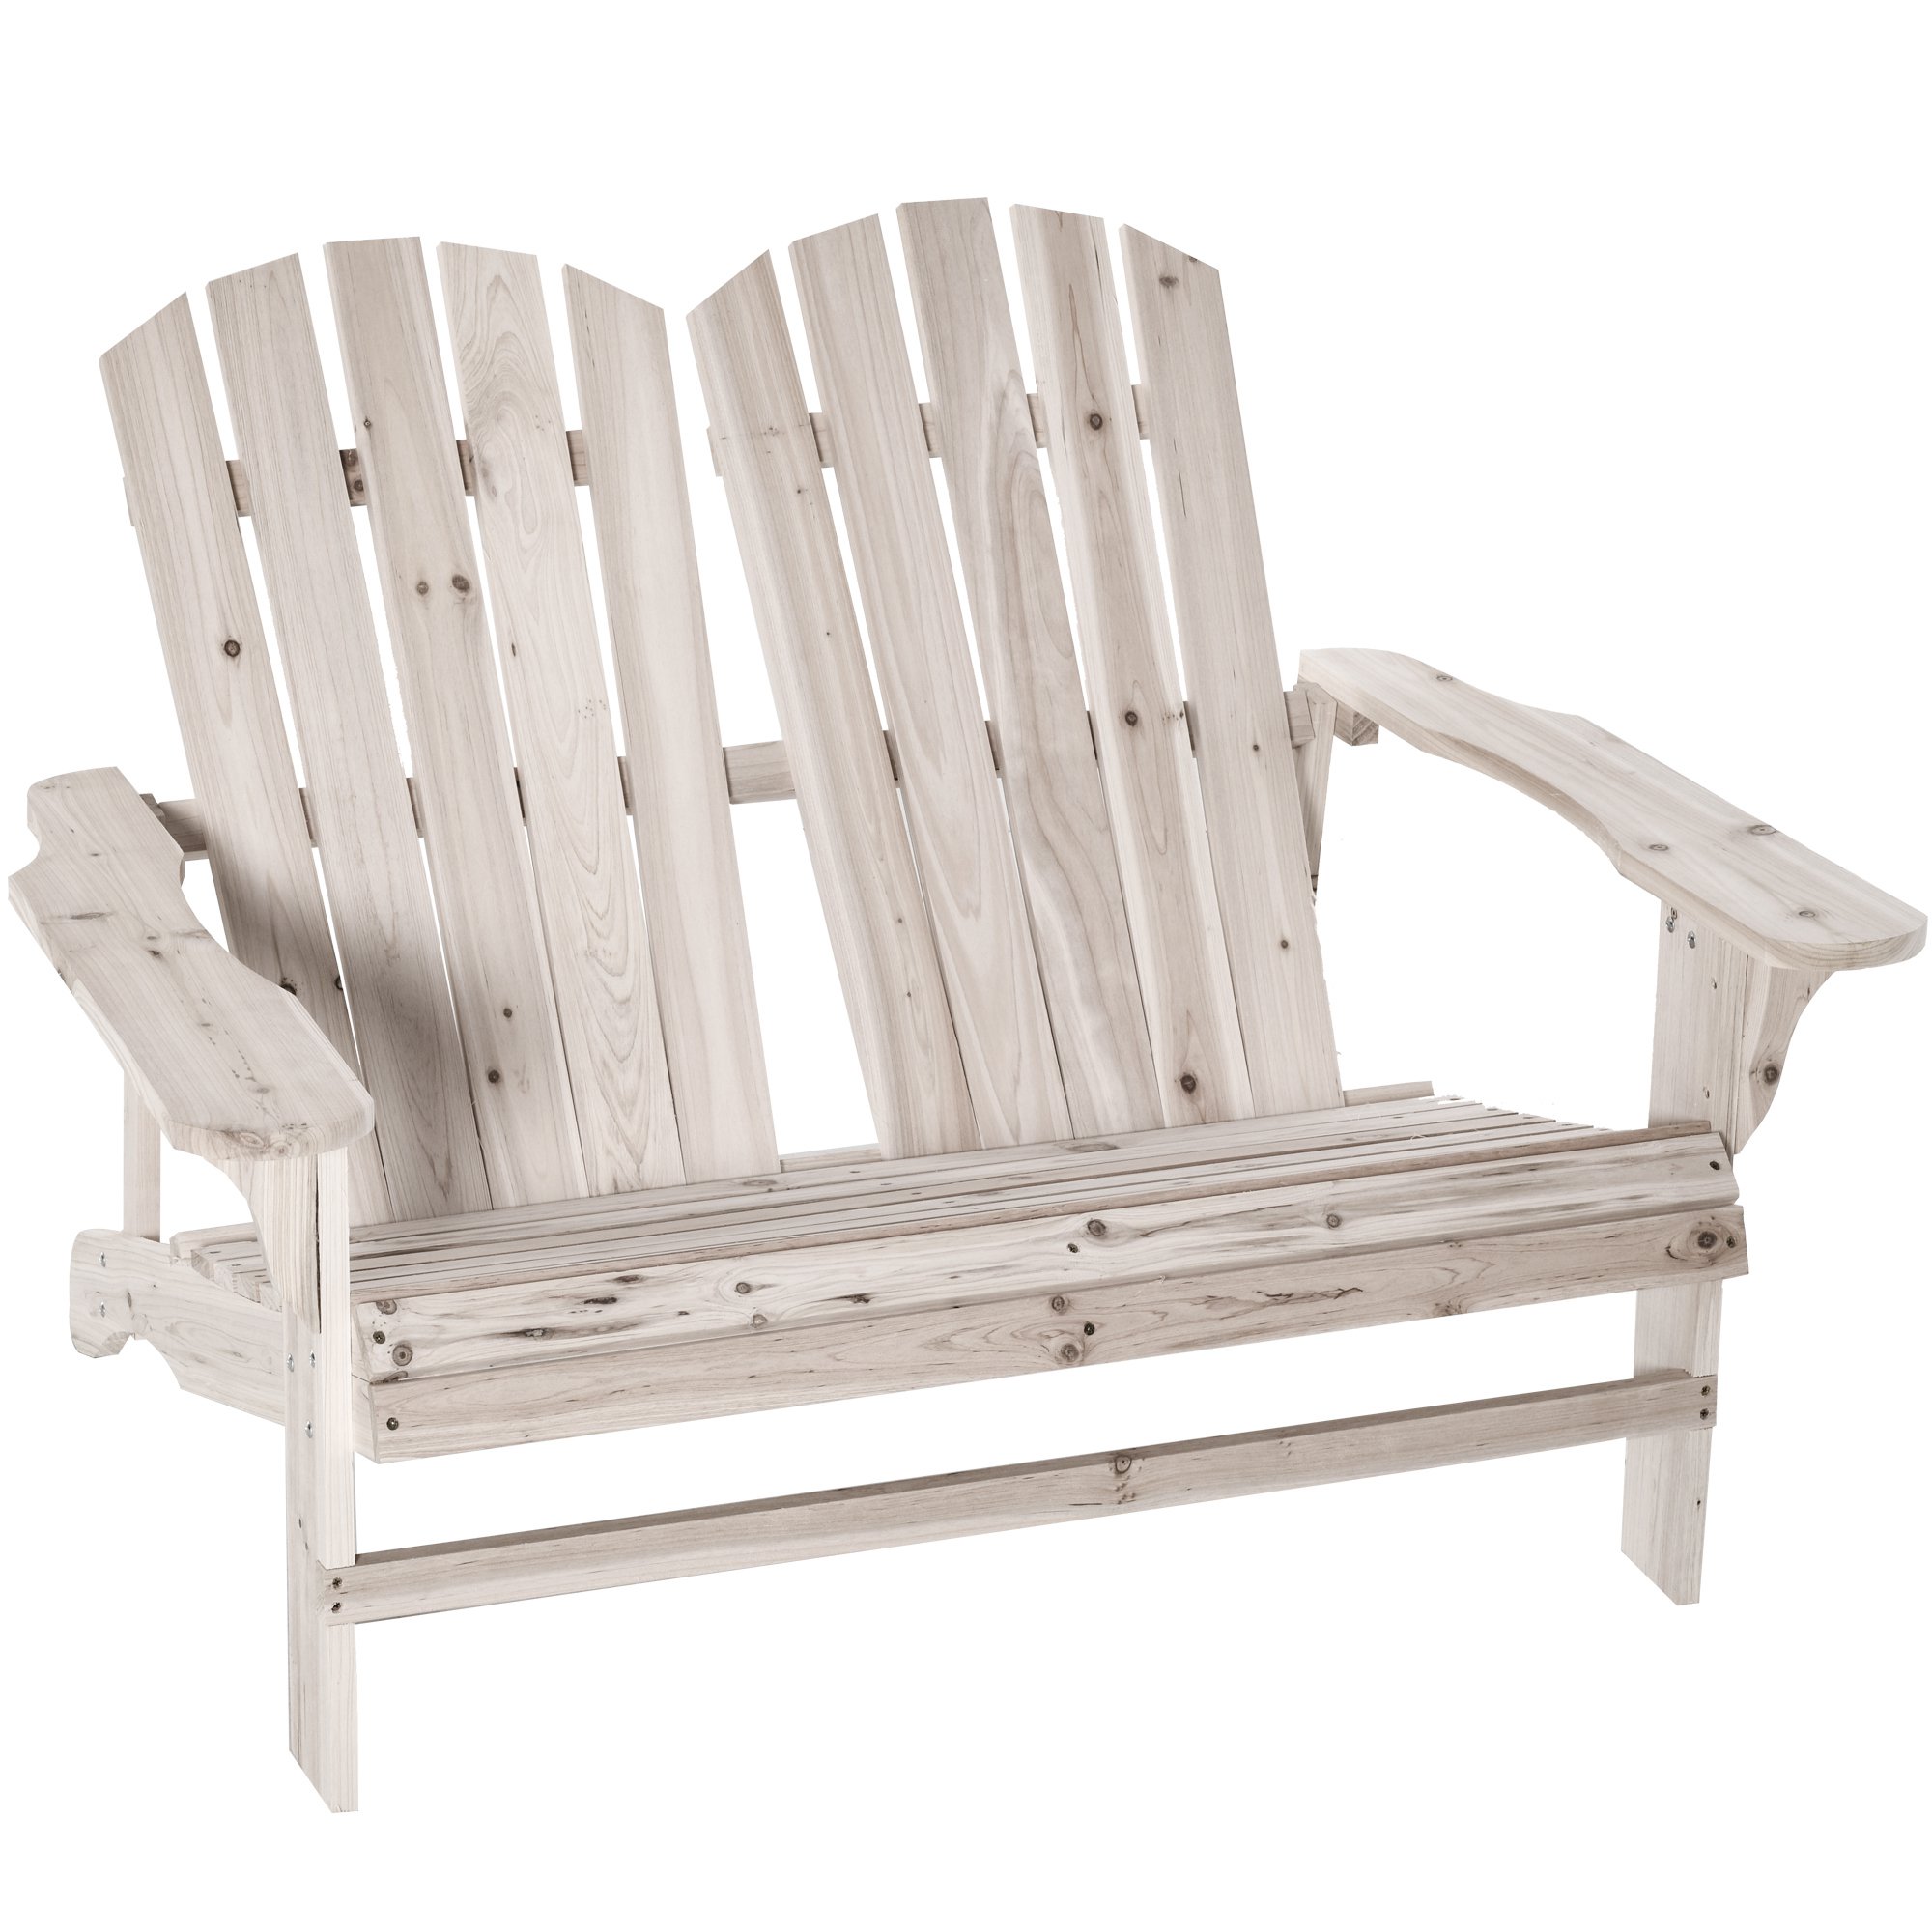 Outsunny Outdoor Adirondack Chair Wooden Loveseat Armchair for Garden Deck Patio, Natural